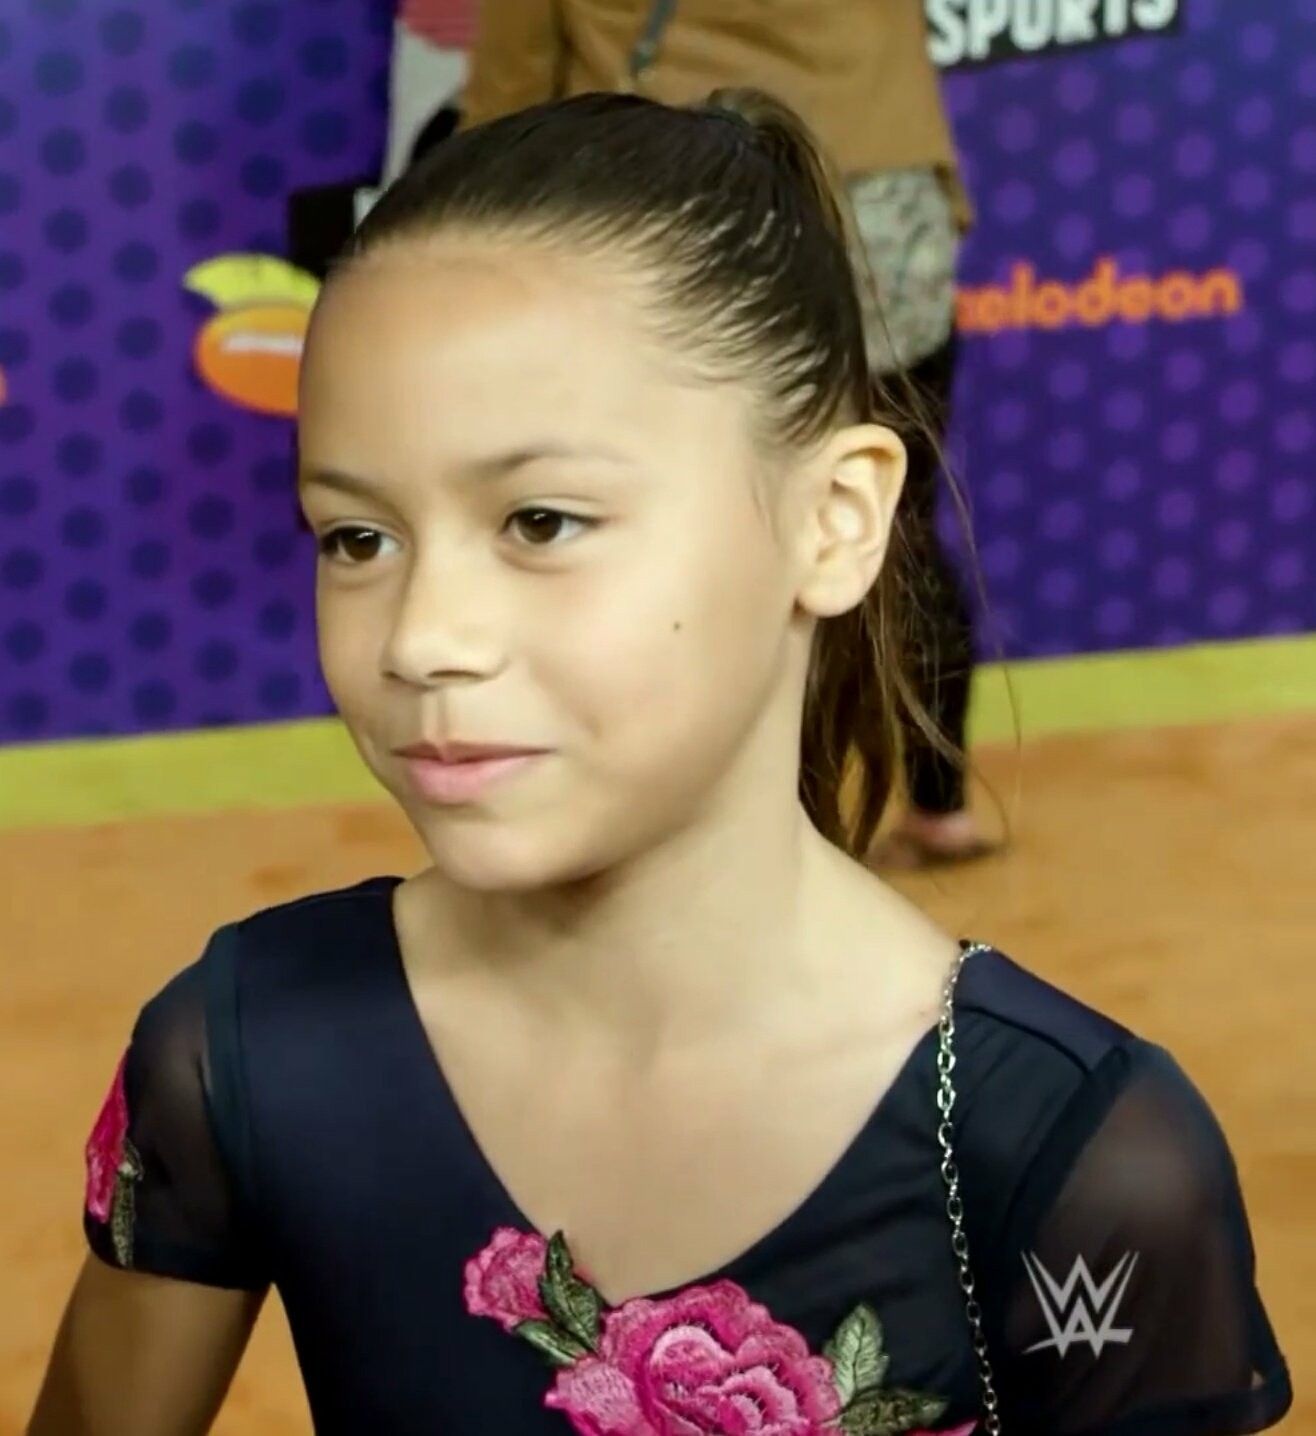 Roman Reign’s Daughter, Joelle Anoa’i Bio: Age, Net Worth, Parents, Siblings, Instagram, Height, Wiki